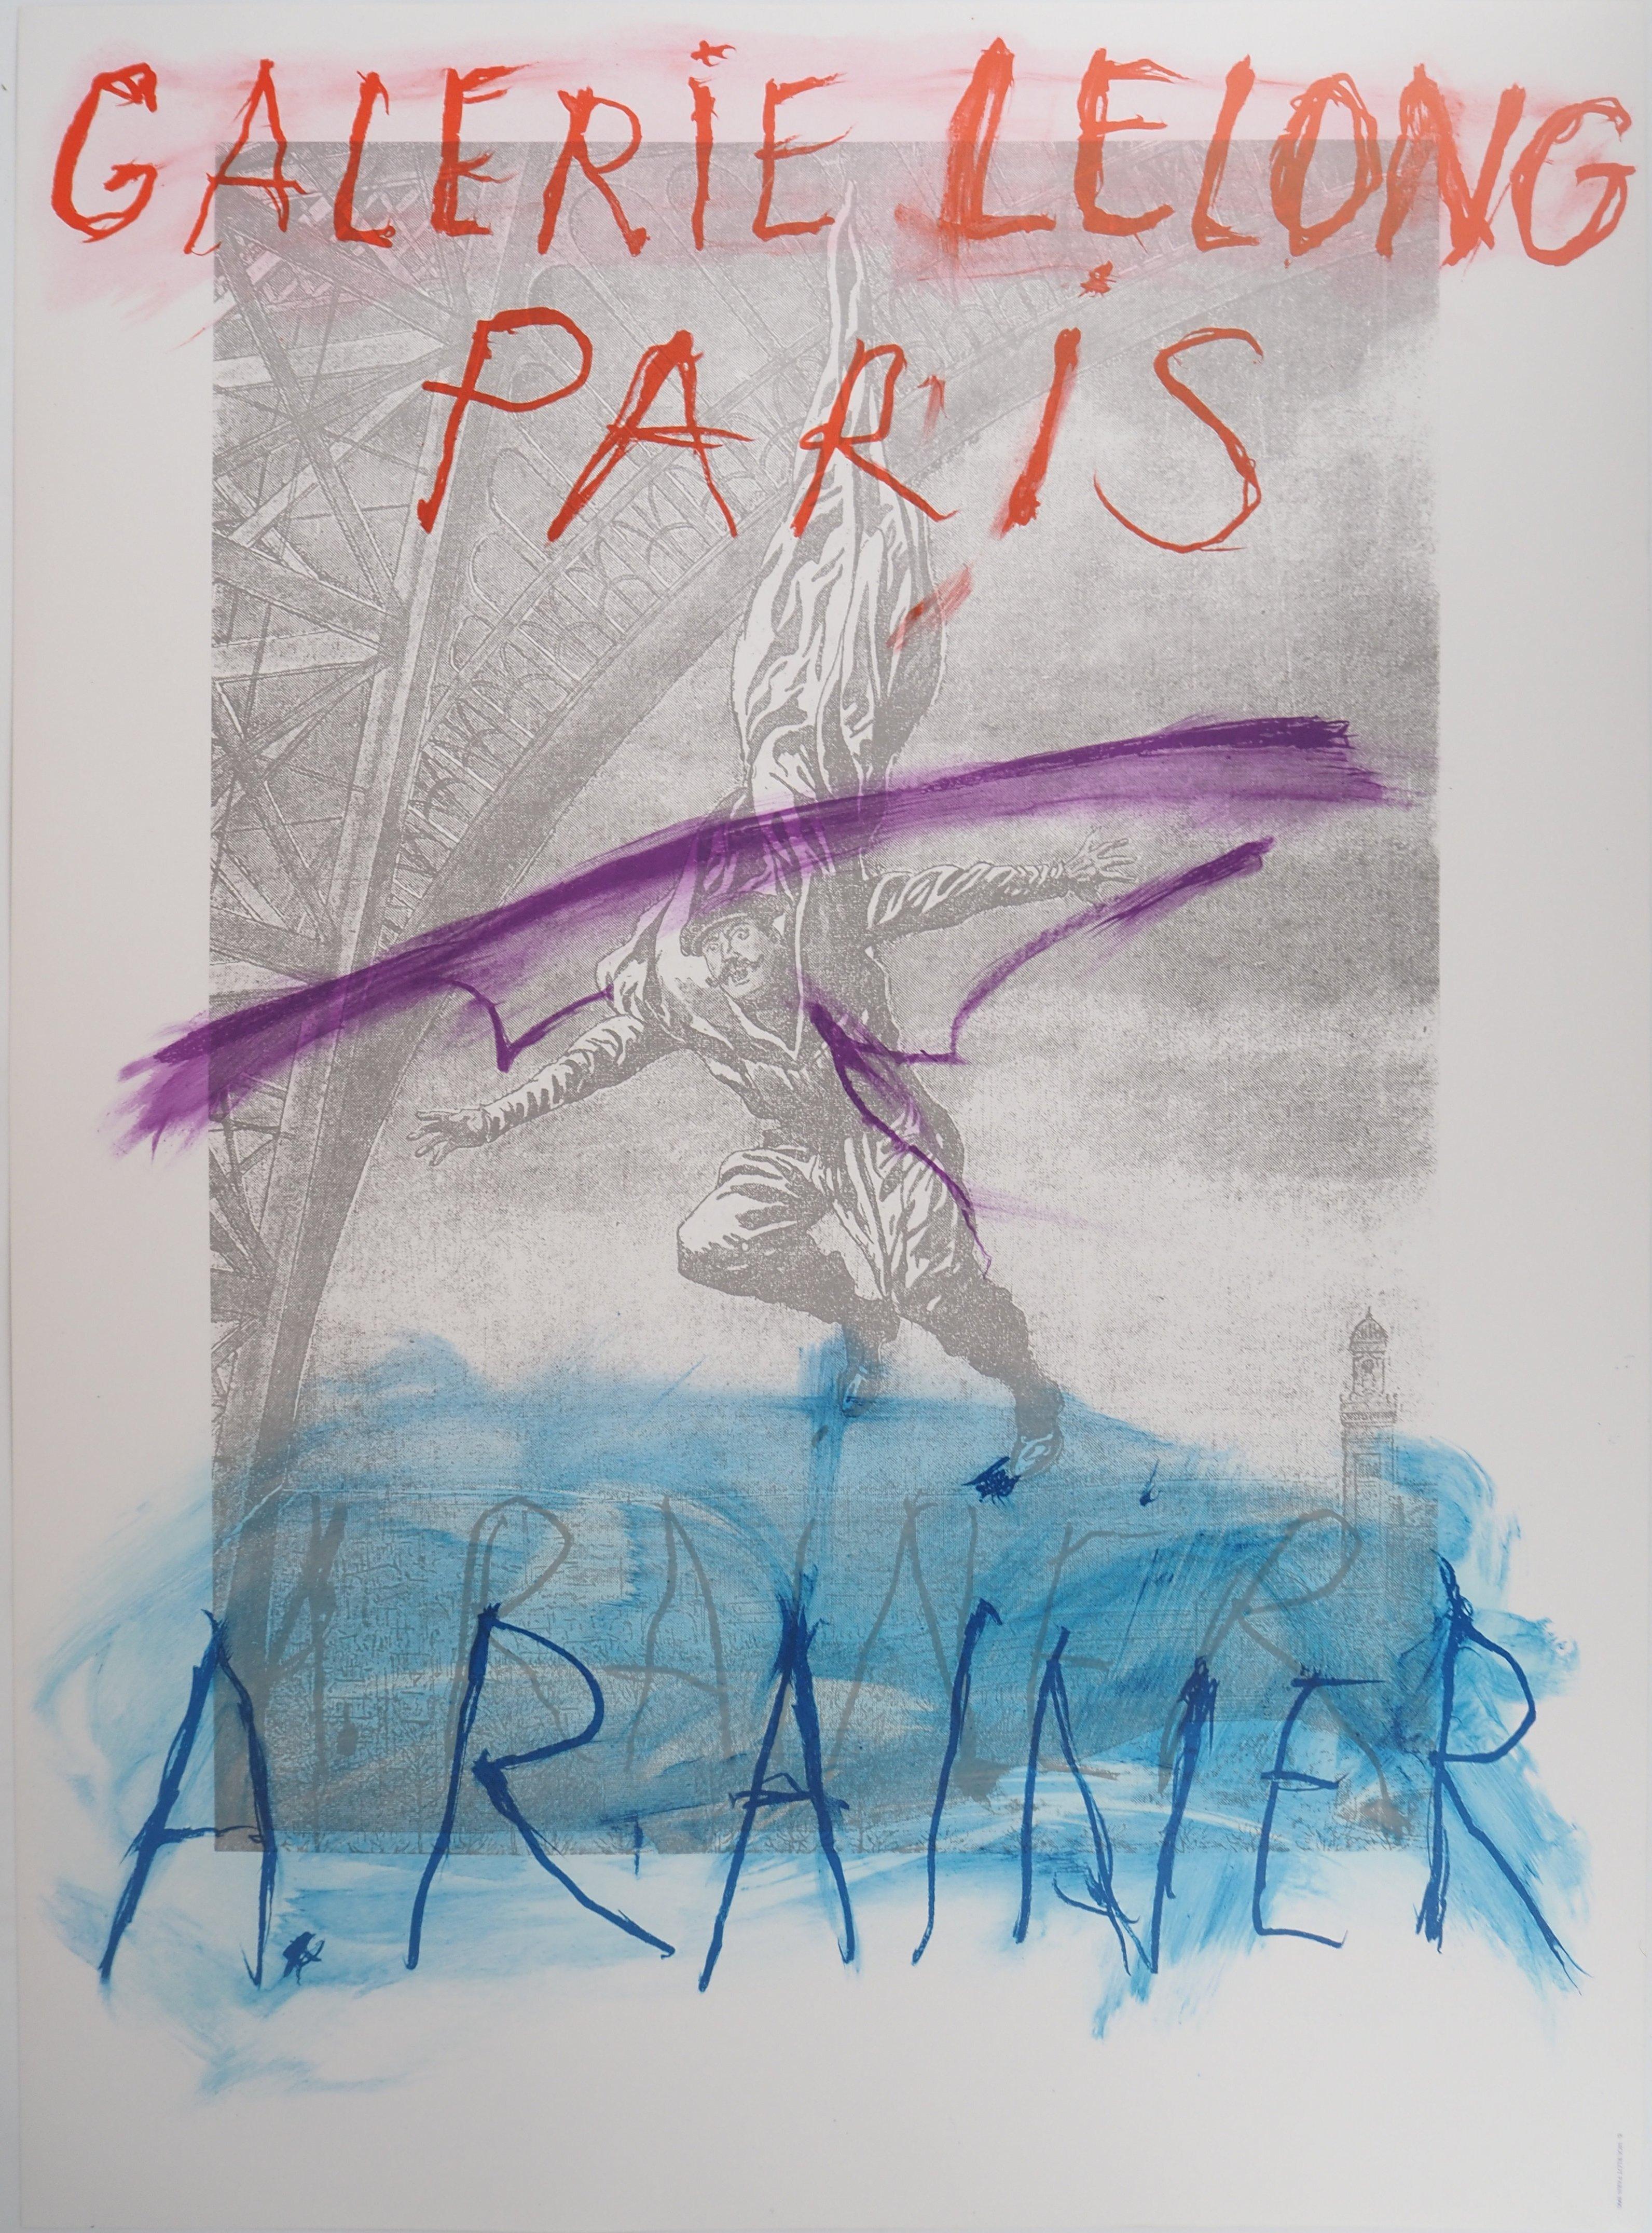 Arnulf Rainer Abstract Print - Eiffel Tower and Informal Composition - Original Vintage Lithographic Poster